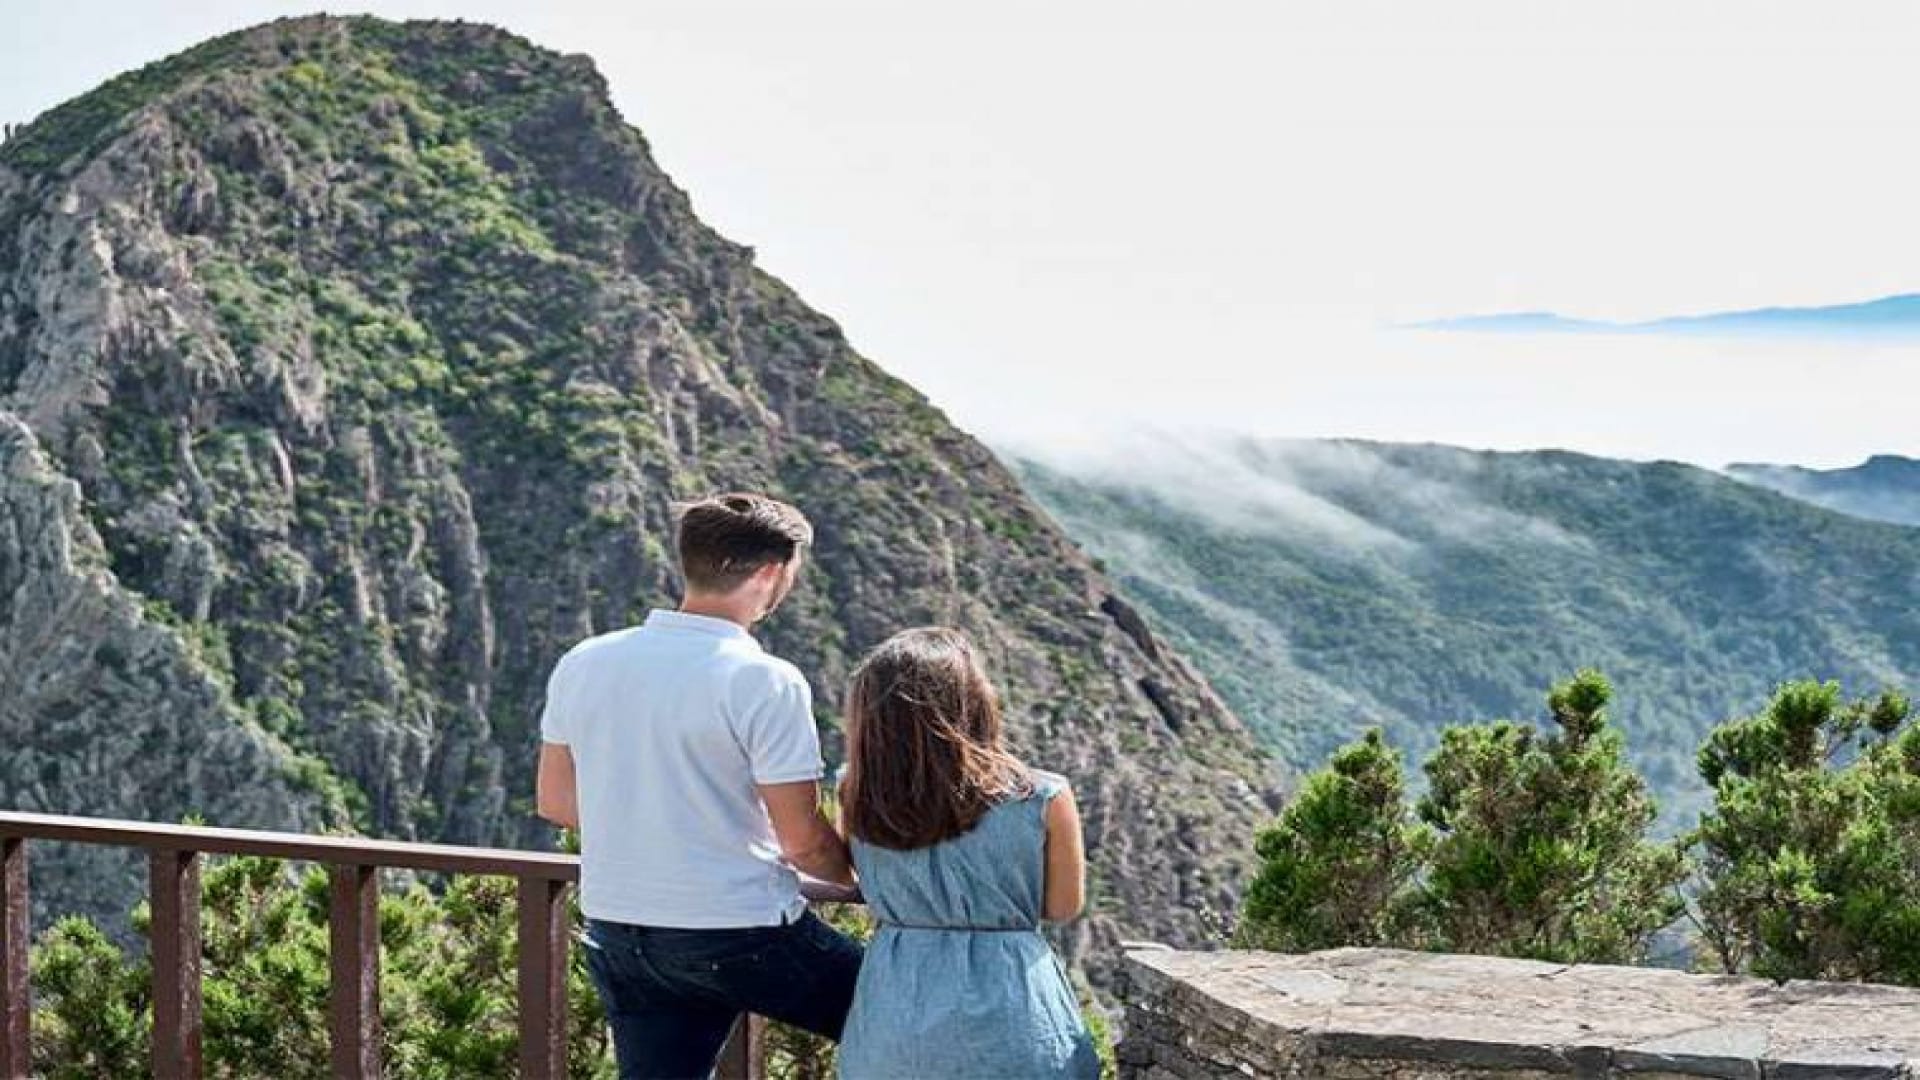 Couple in La Gomera marvel at the beautiful scenery from a viewpoint